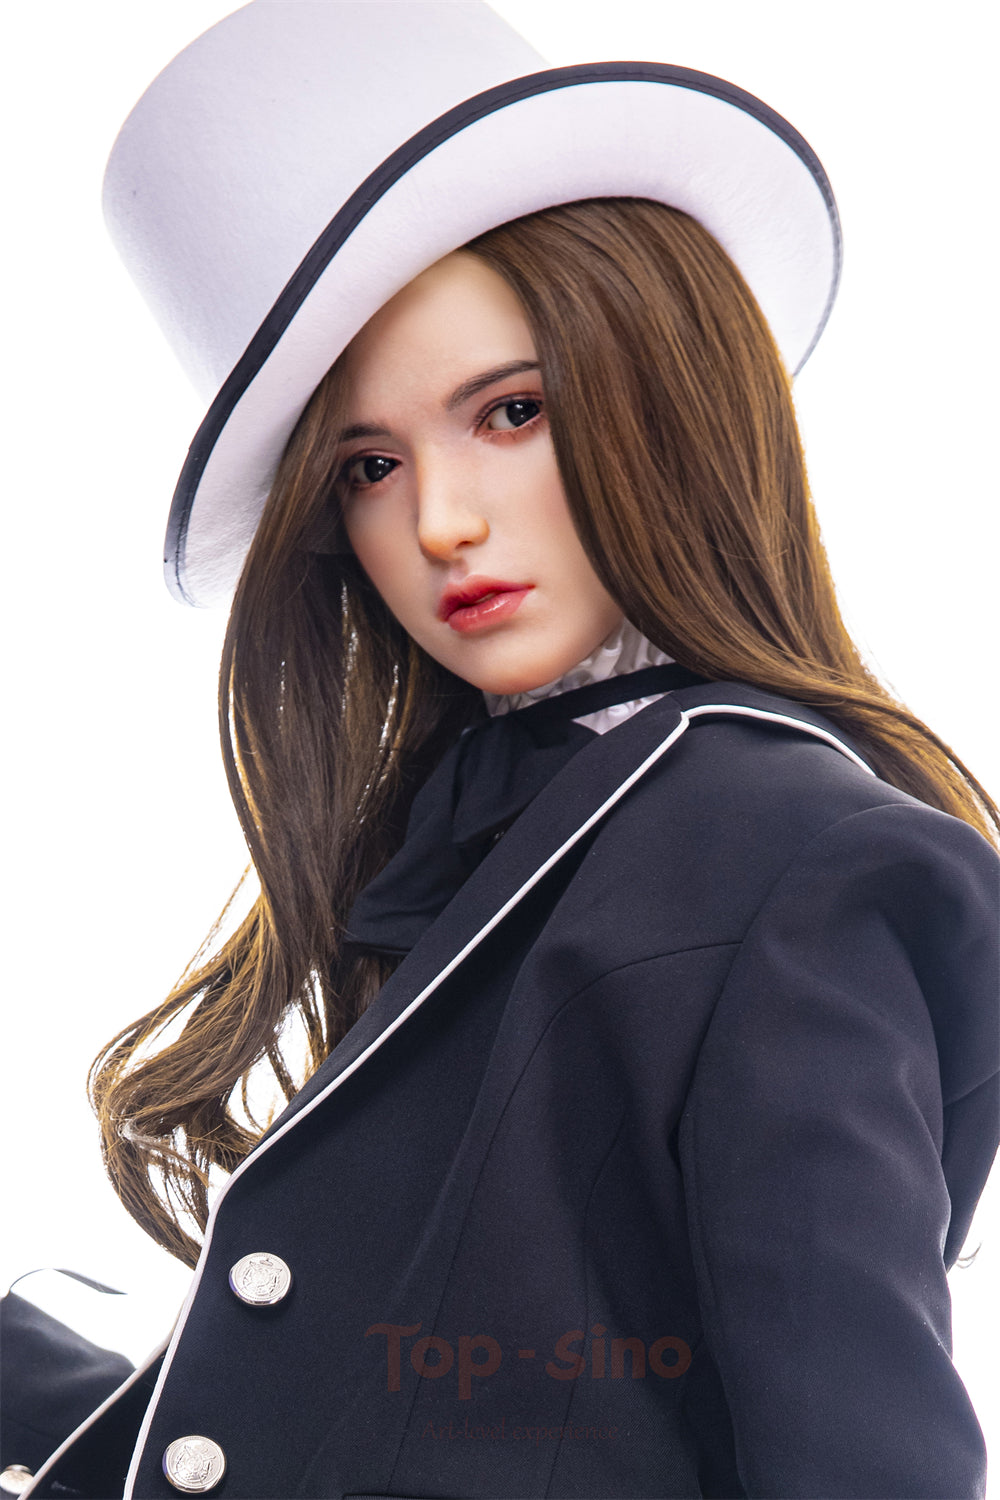 Top Sino 158 cm B Platinum Silicone - Missy | Buy Sex Dolls at DOLLS ACTUALLY